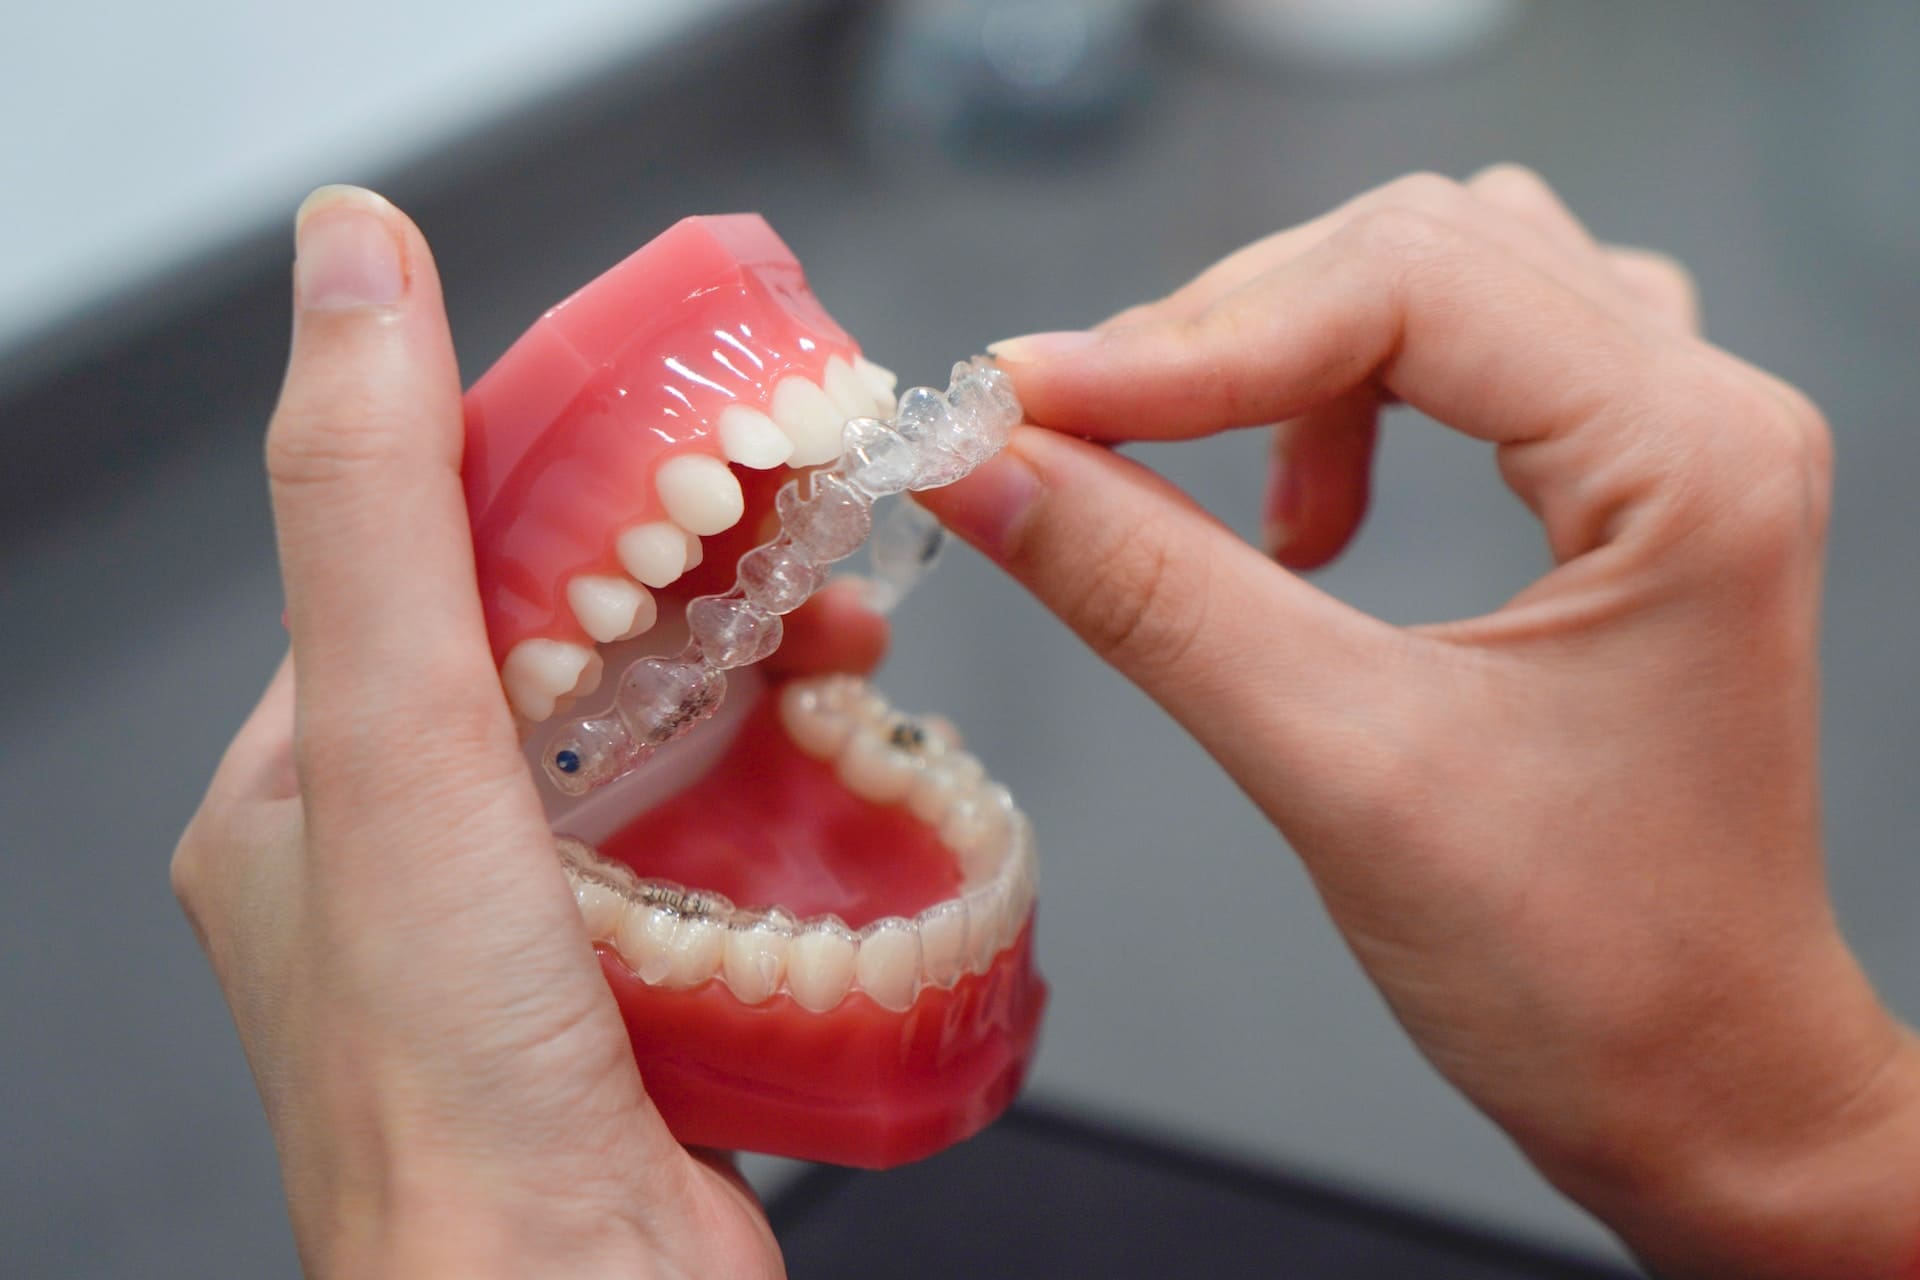 Invisalign aligners being applied to a teeth dummy.